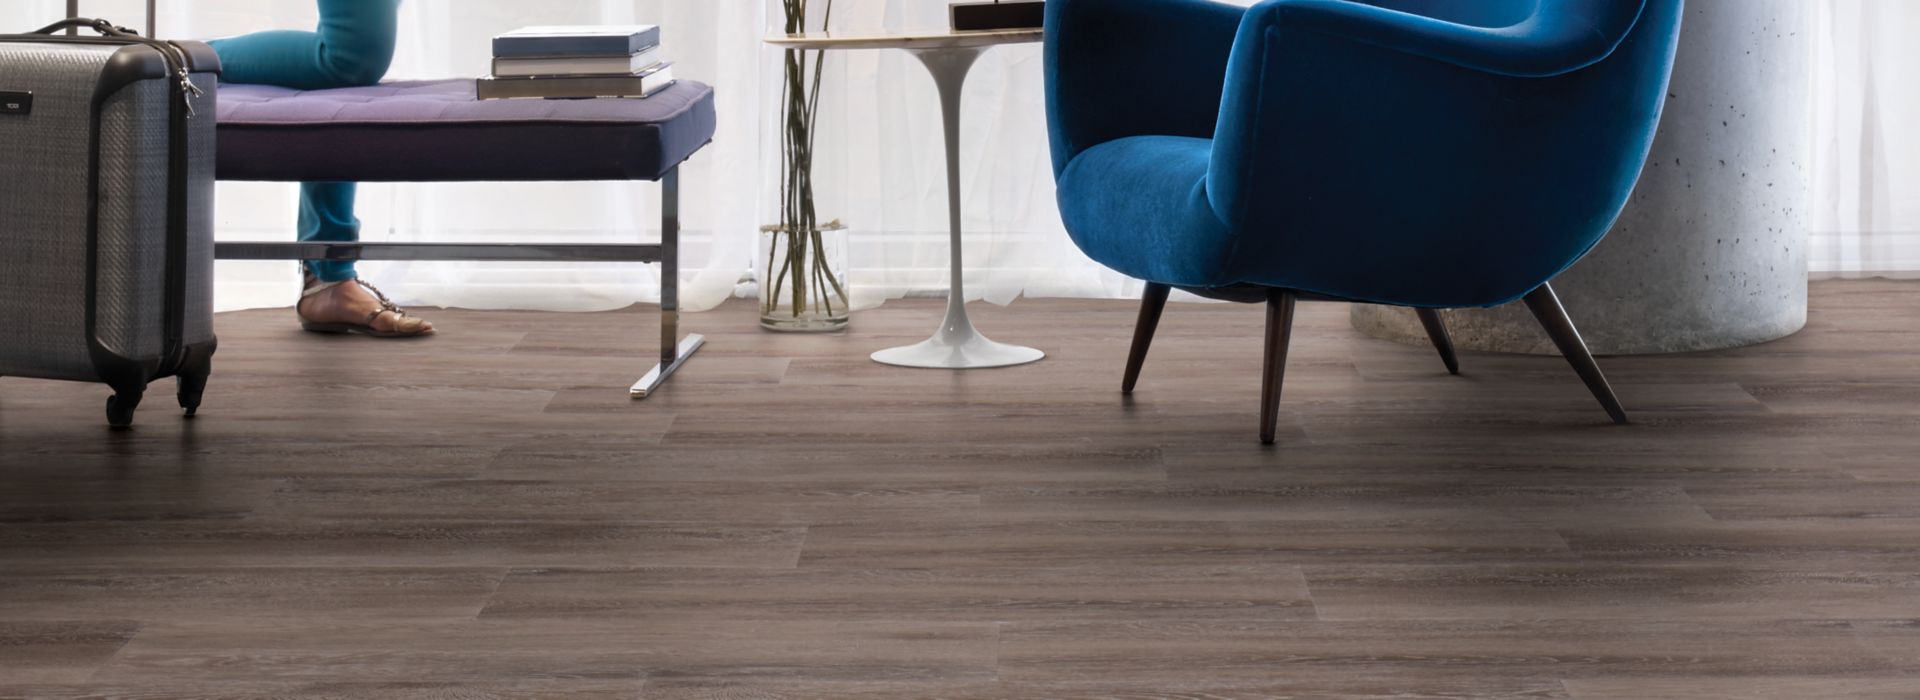 Interface Textured Woodgrains LVT in lobby setting with table and chair numéro d’image 2